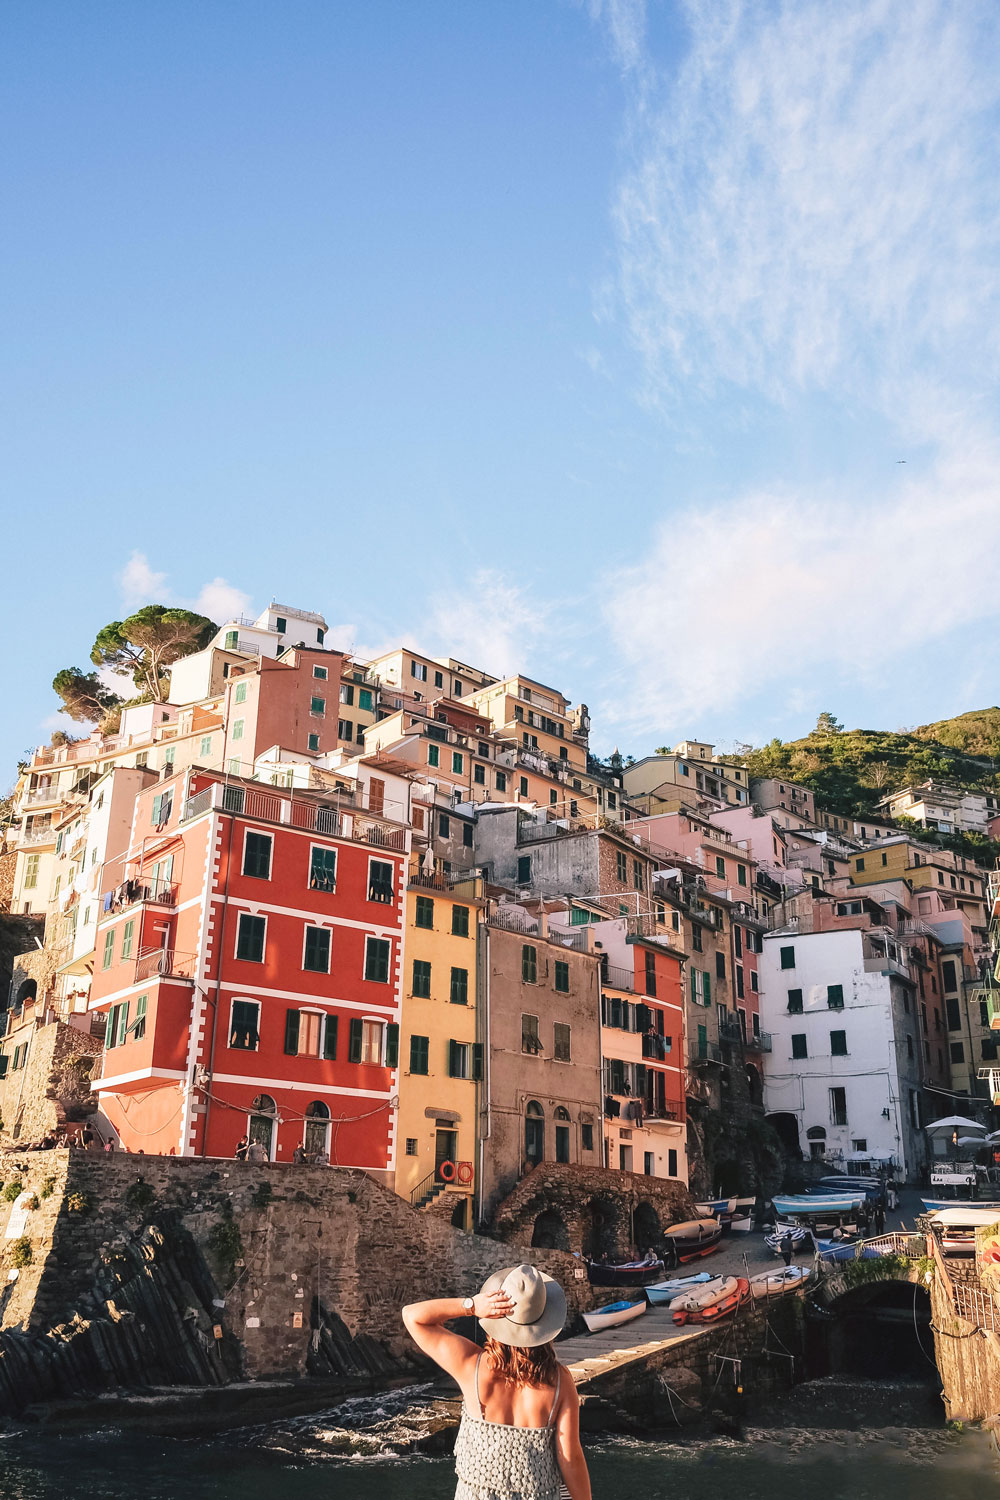 what to see in Cinque Terre, what to do in Cinque Terre, what to see in Riomaggiore, what to see in Riomaggiore, what to pack for Italy, best views in Cinque Terre, where to hike in Italy, where to hike in Cinque Terre, monterosso al mare hike, Vernazza hike, views of Vernazza, where to stay in Cinque Terre, Manarola travel guide, Manarola tourism guide, Manarola Italy, Manarola views by To Vogue or Bust